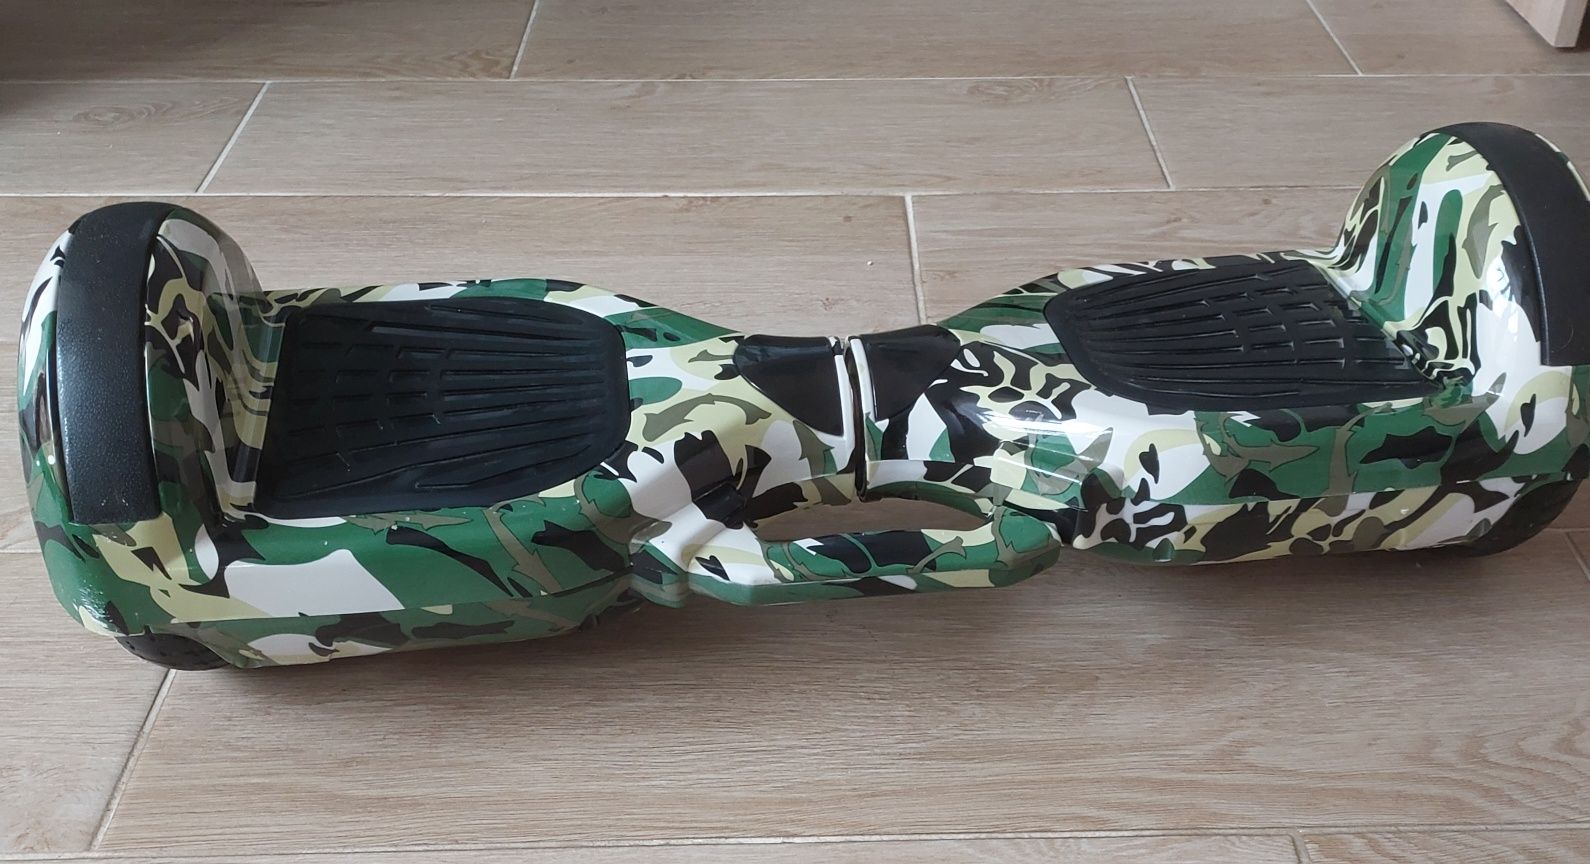 Vând hoverboard 2drive military